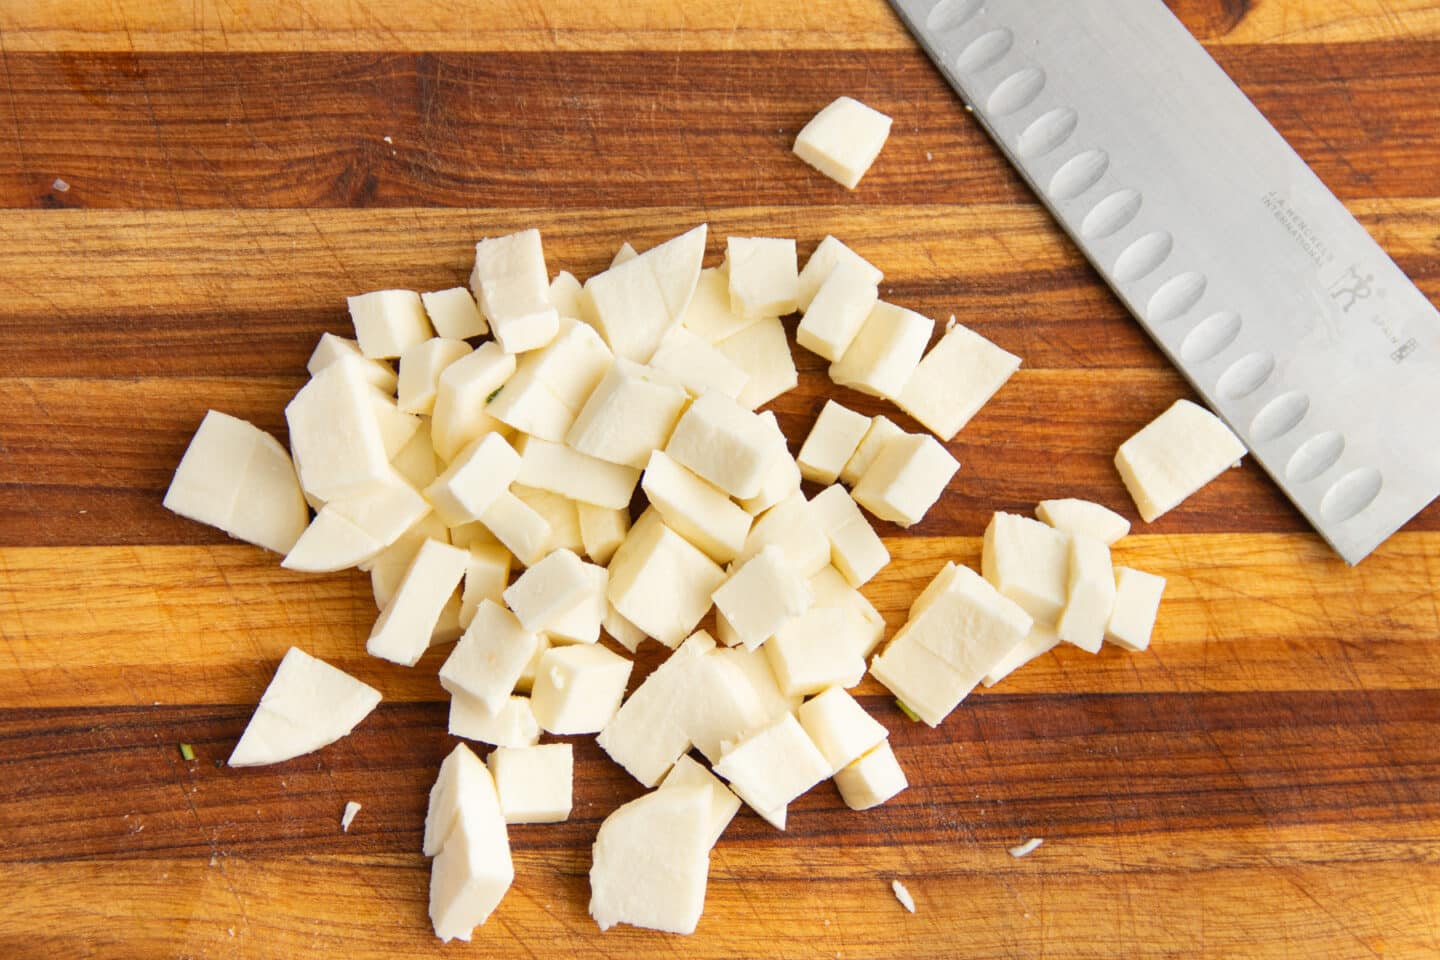 This is a picture of chopped mozzarella.